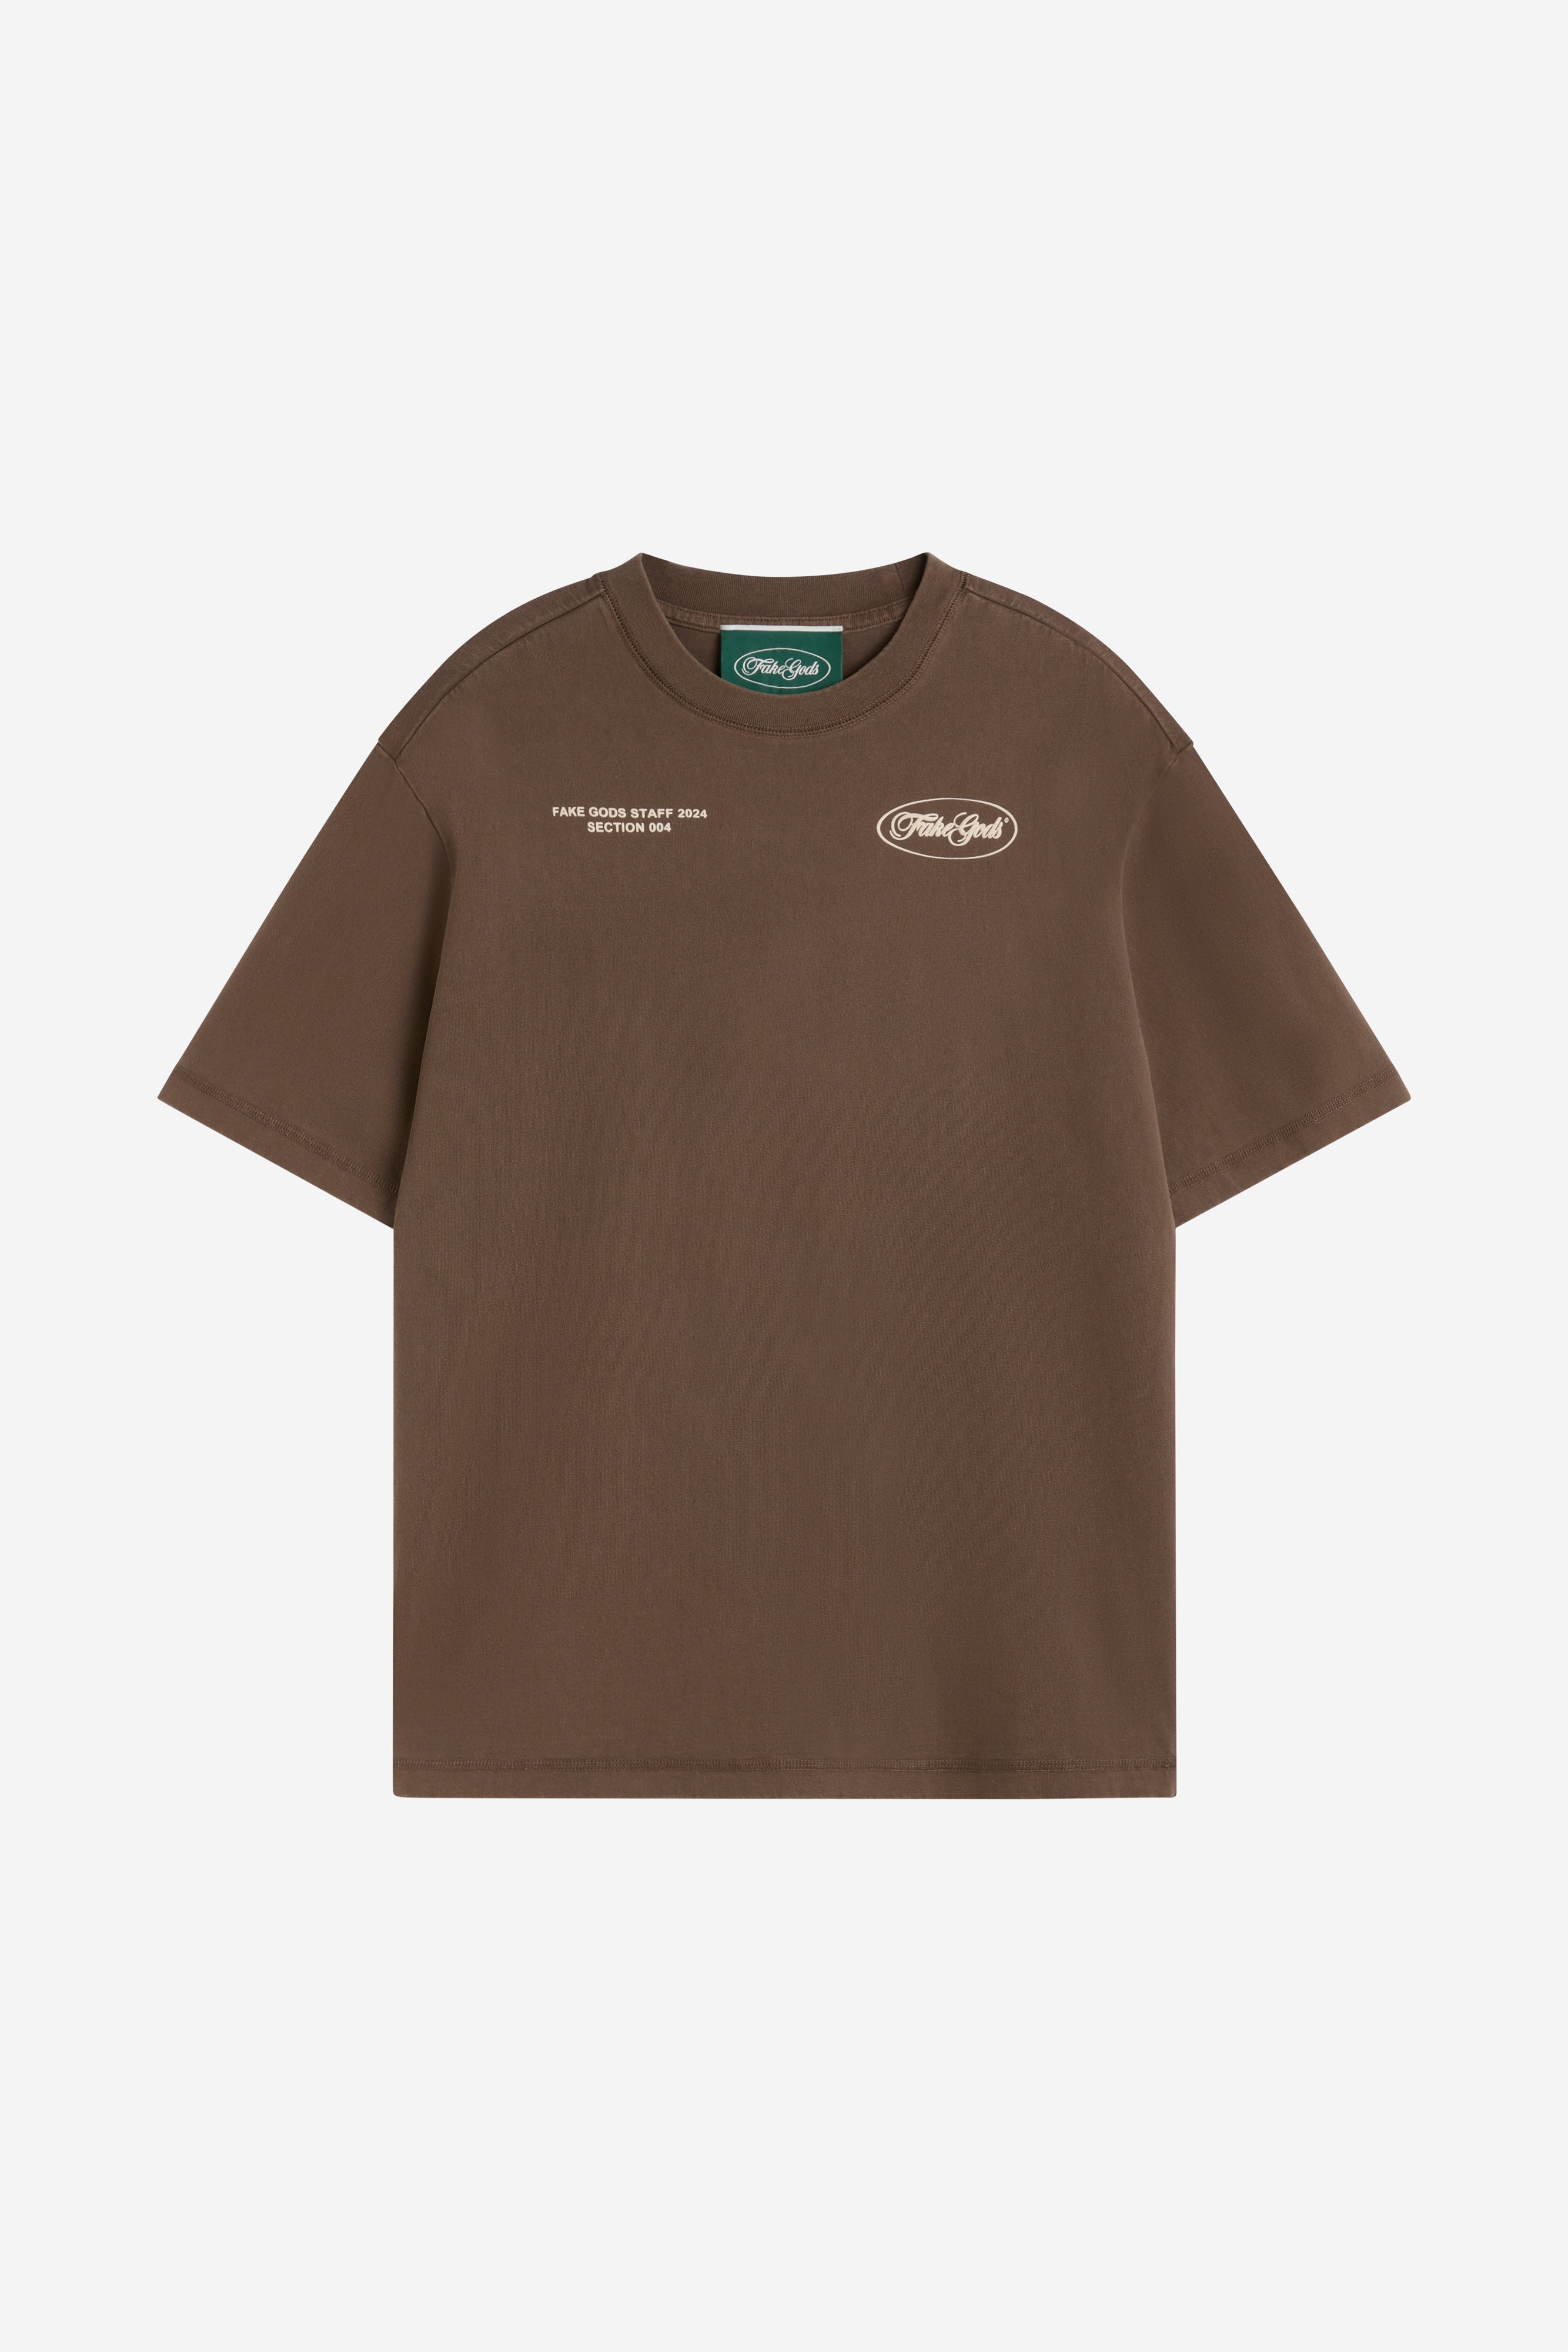 WASHED STAFF TEE BROWN